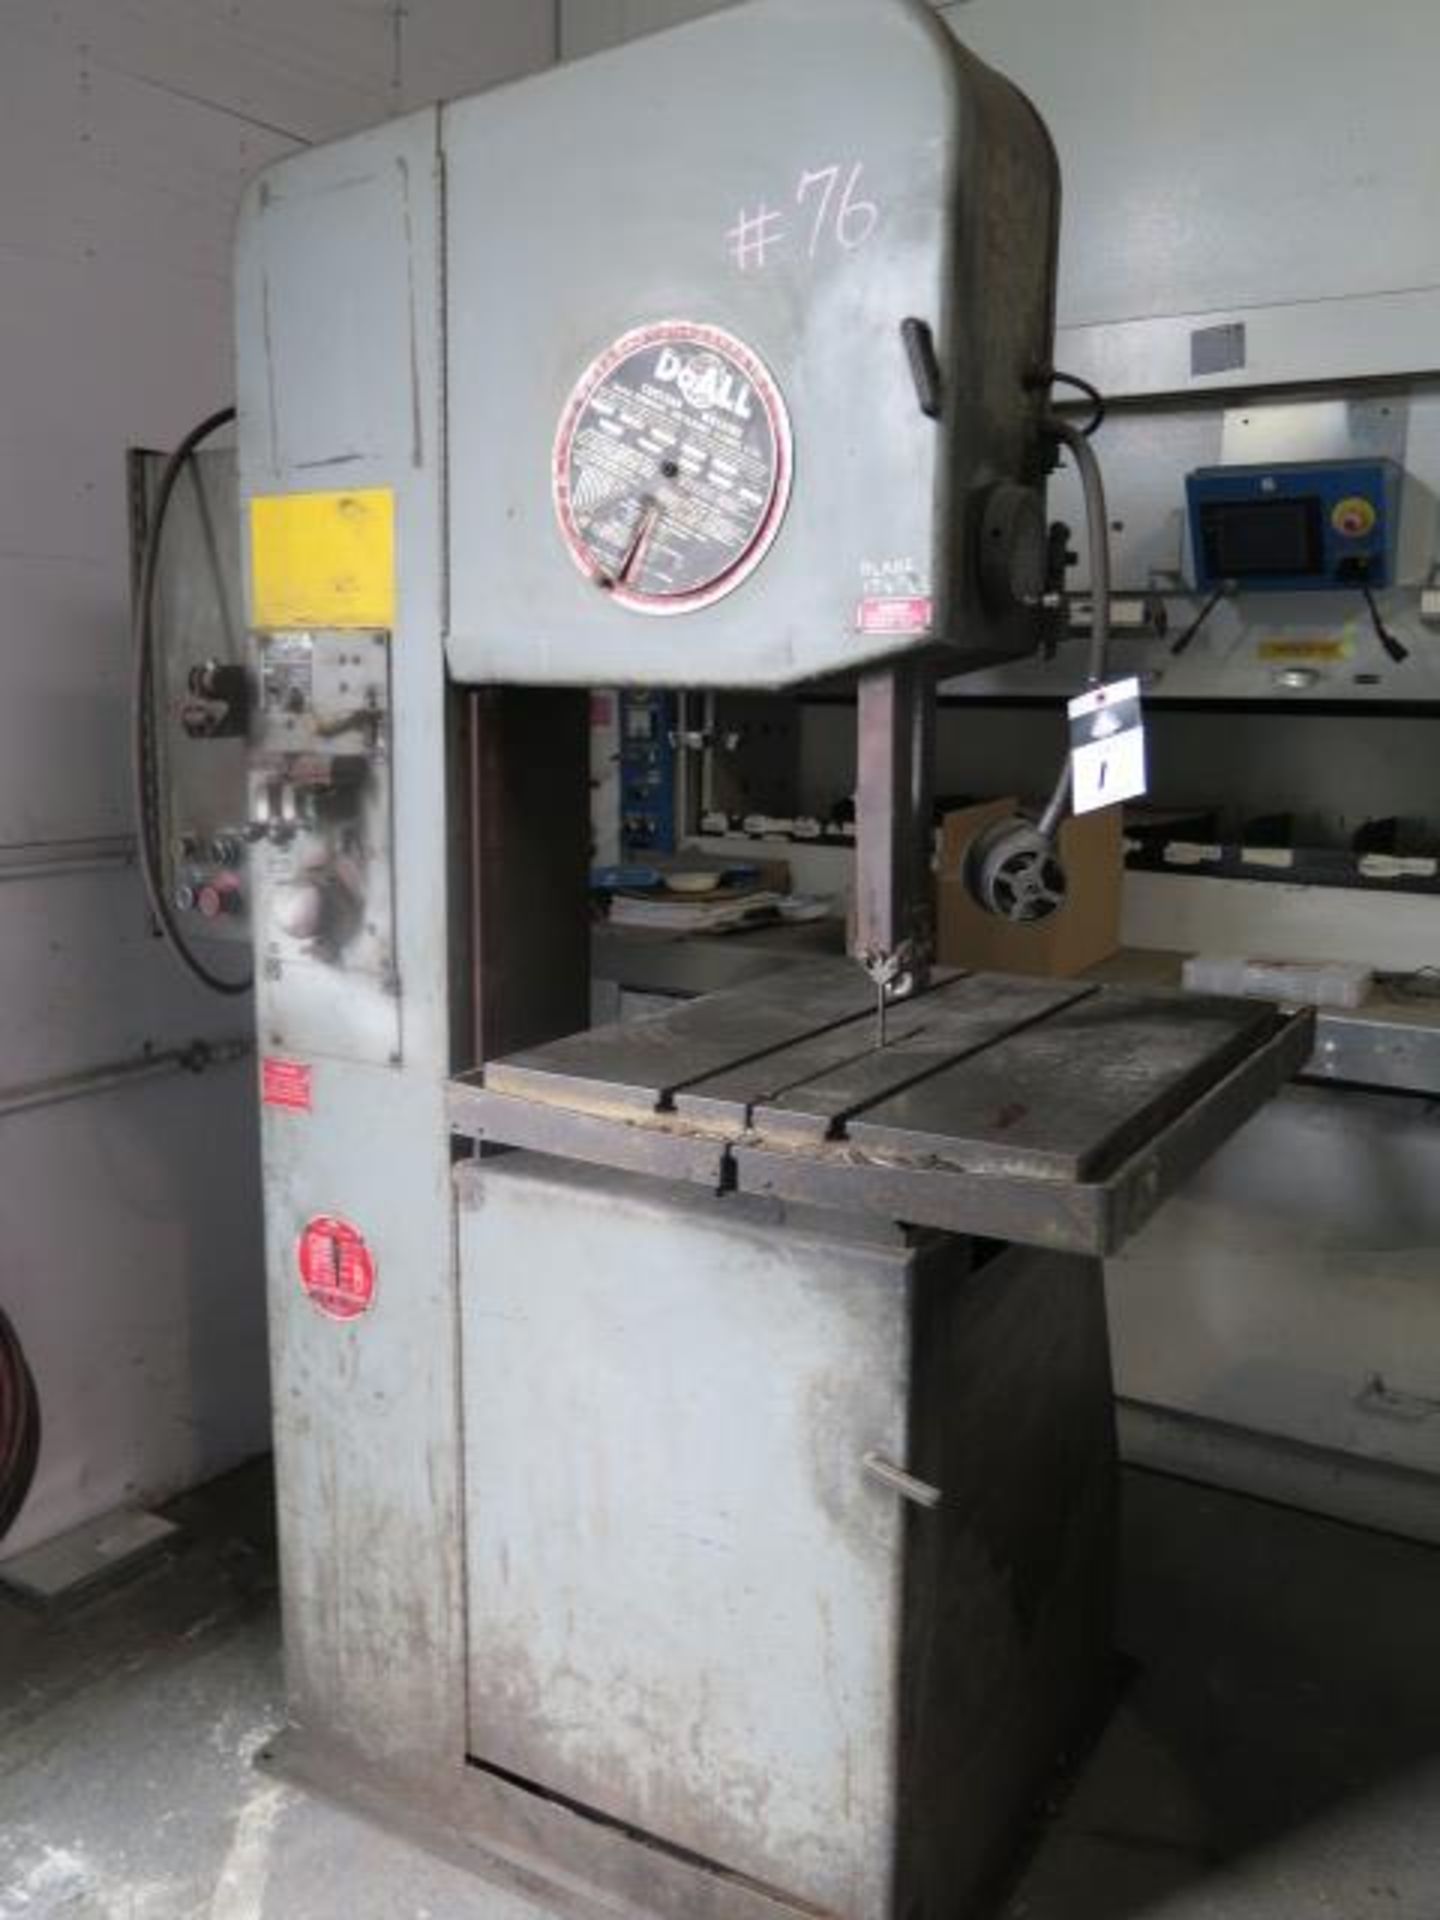 DoAll 2012-1A 20” Vertical Band Saw s/n 340-78413 w/ Blade Welder, 50-5200 FPM, SOLD AS IS - Image 2 of 8